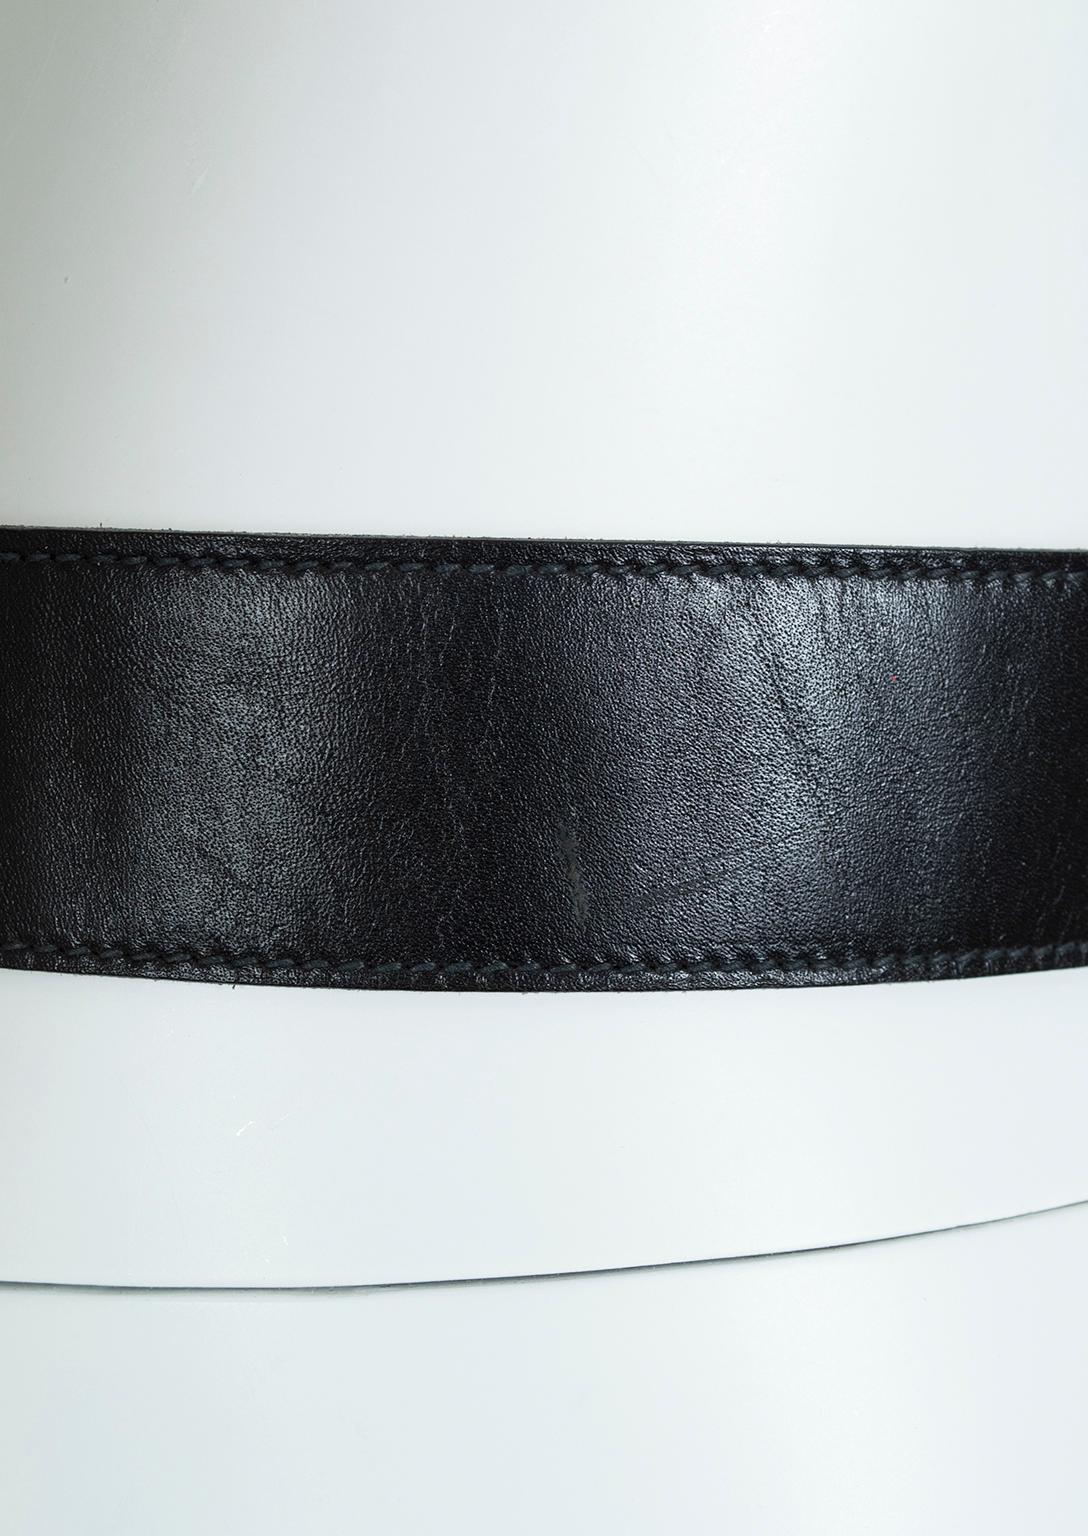 Calderon Anne Klein Black Wide Leather Belt with Dangling Gold Chain– S-M, 1960s 2